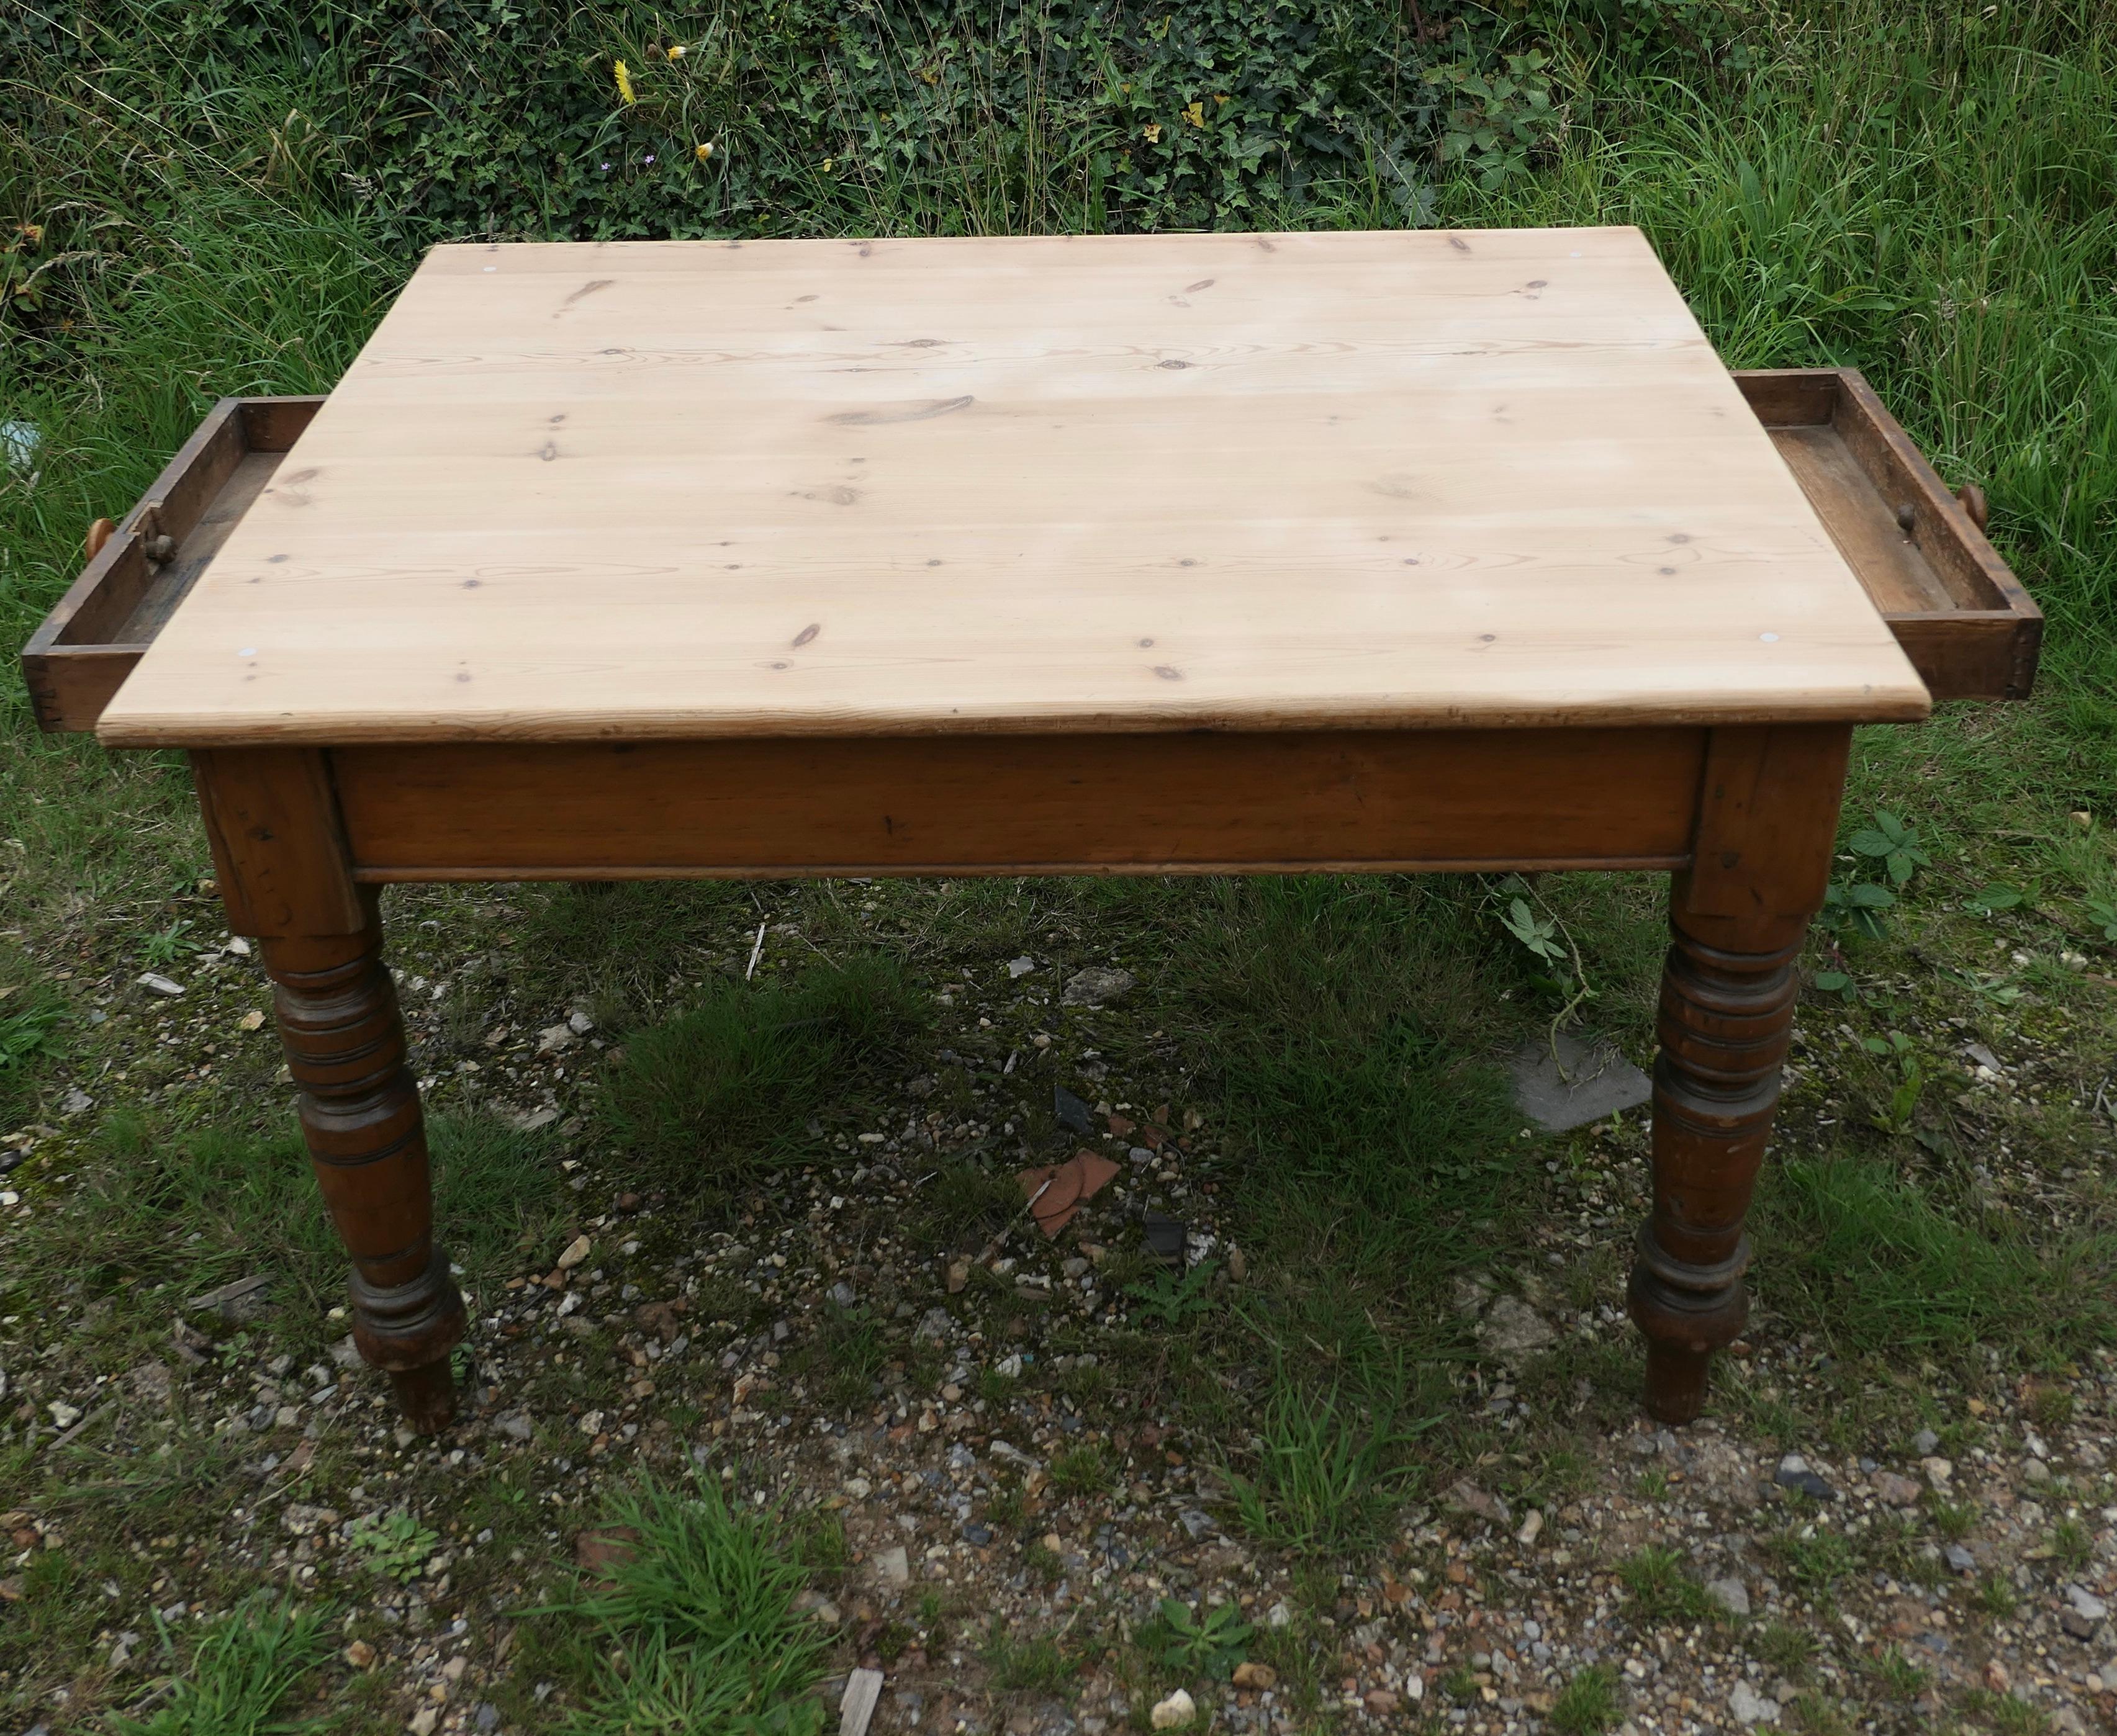 Victorian 6 Seater Farmhouse Pine Table    This is a good Rustic Farmhouse table  For Sale